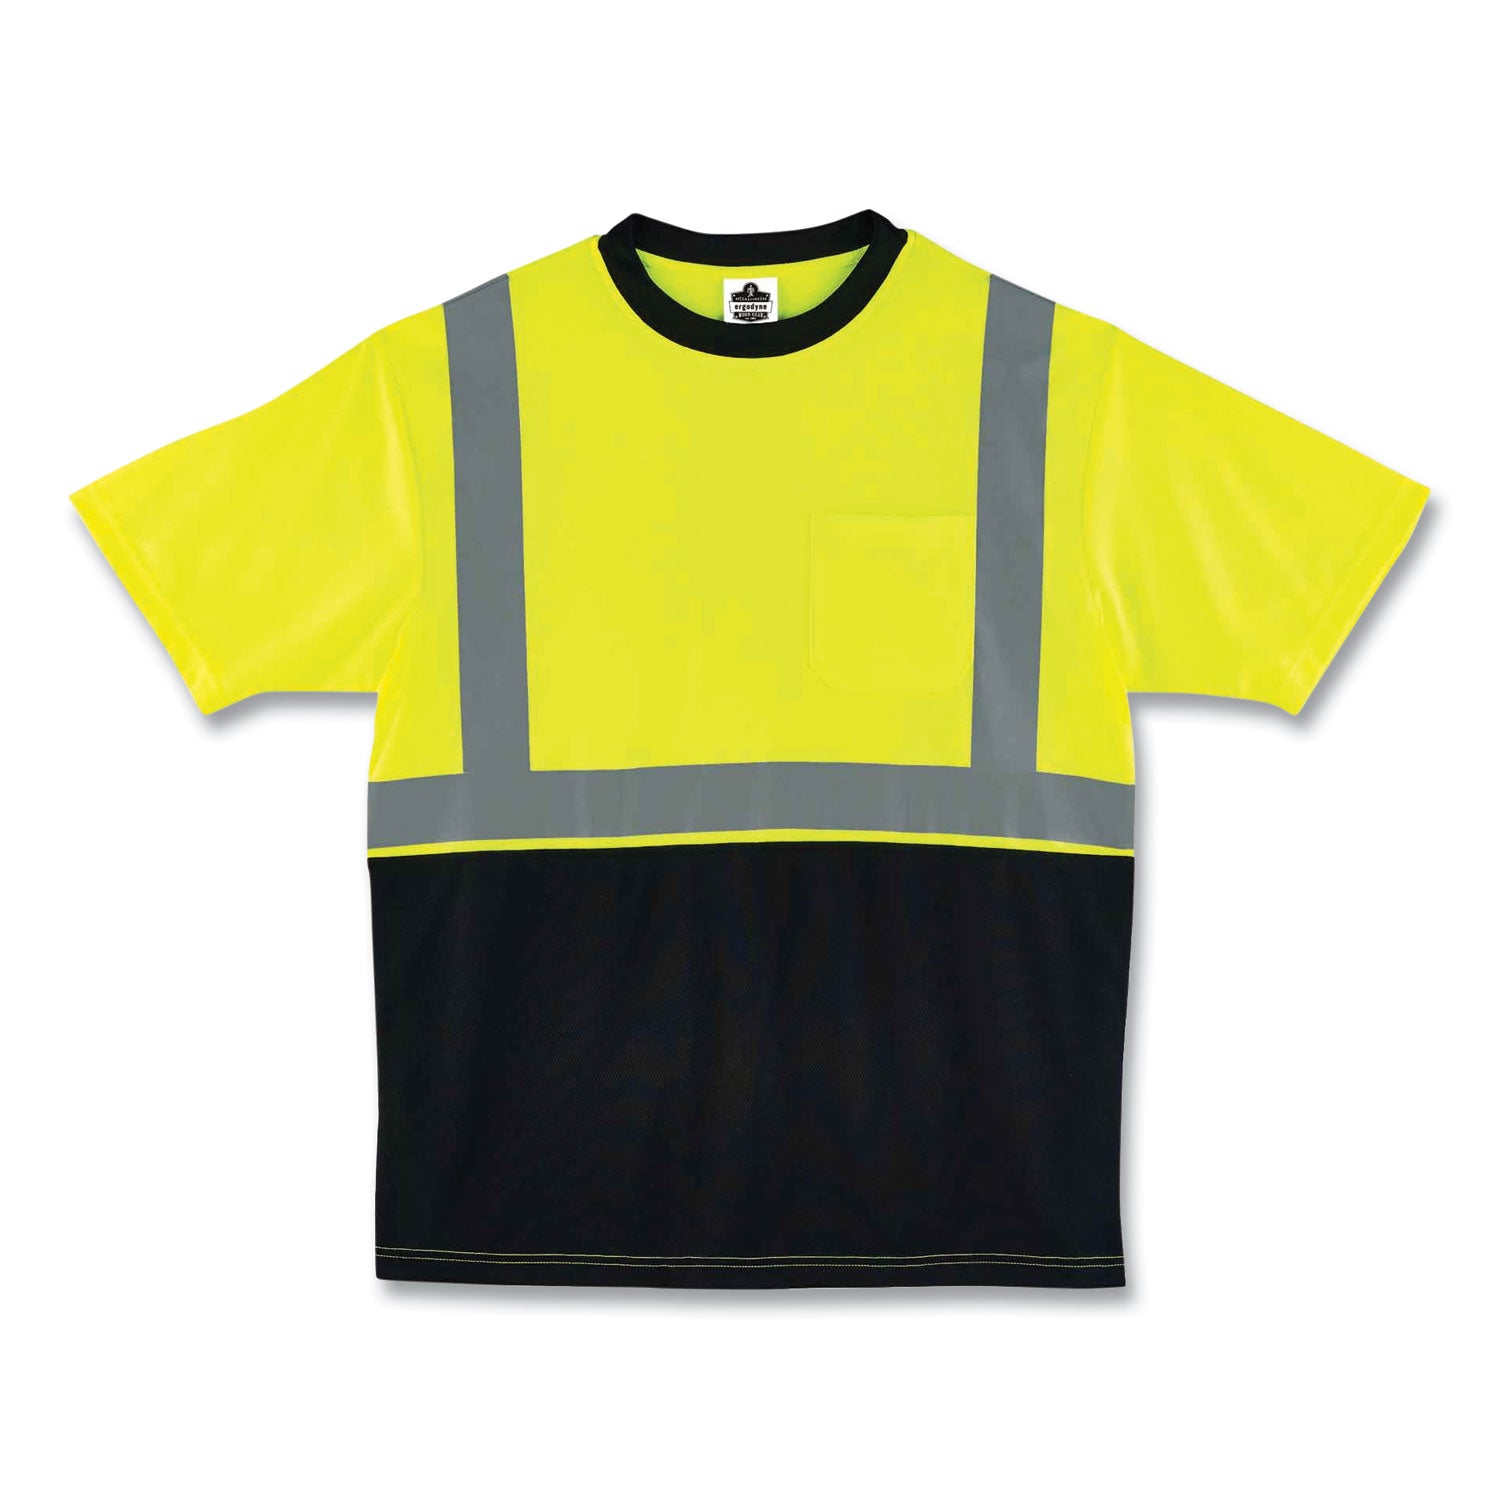 glowear-8289bk-class-2-hi-vis-t-shirt-with-black-bottom-2x-large-lime-ships-in-1-3-business-days_ego22506 - 1